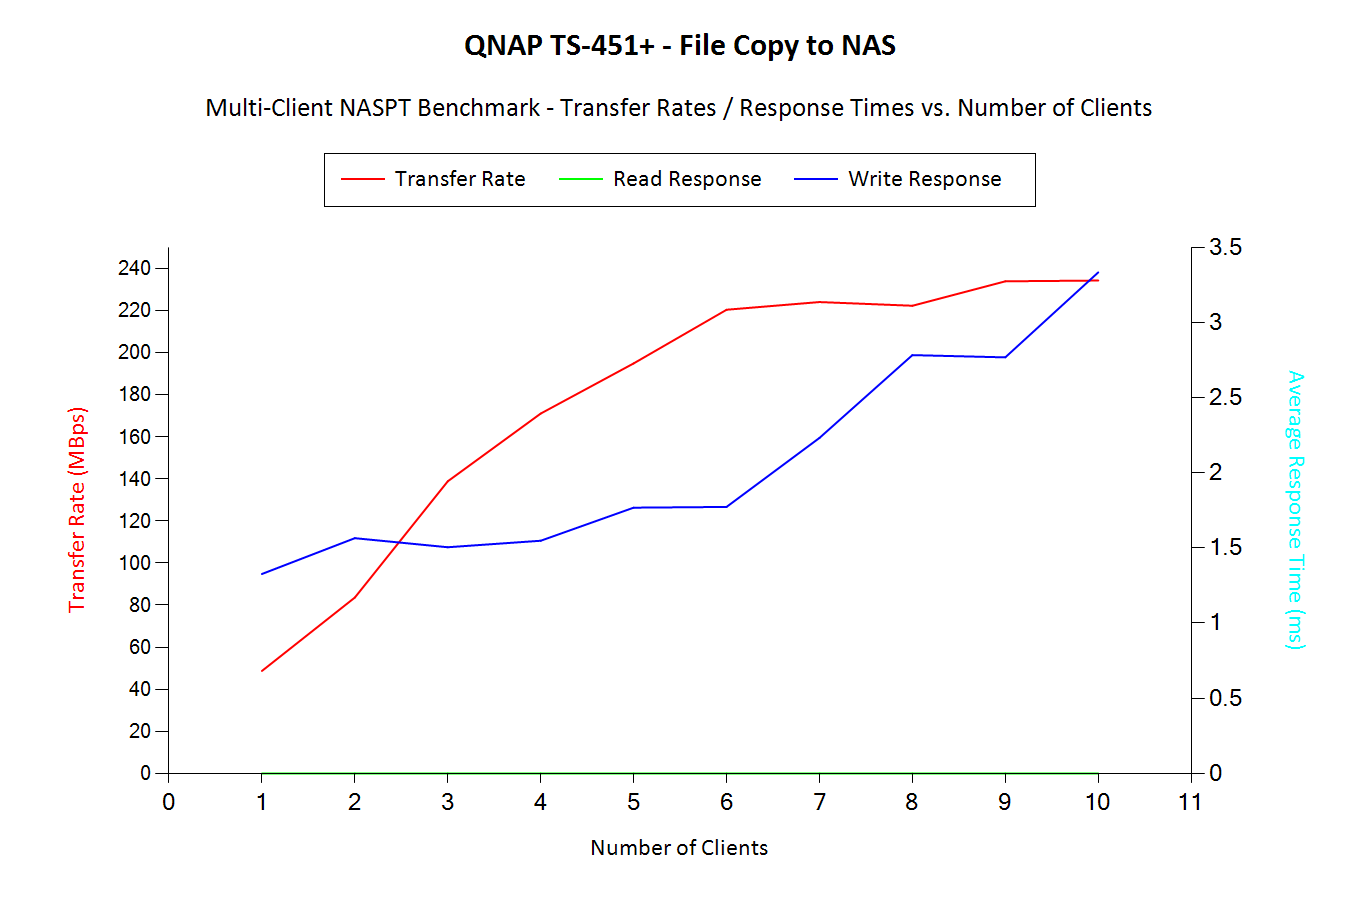 File Copy to NAS - Multi-Client Benchmark